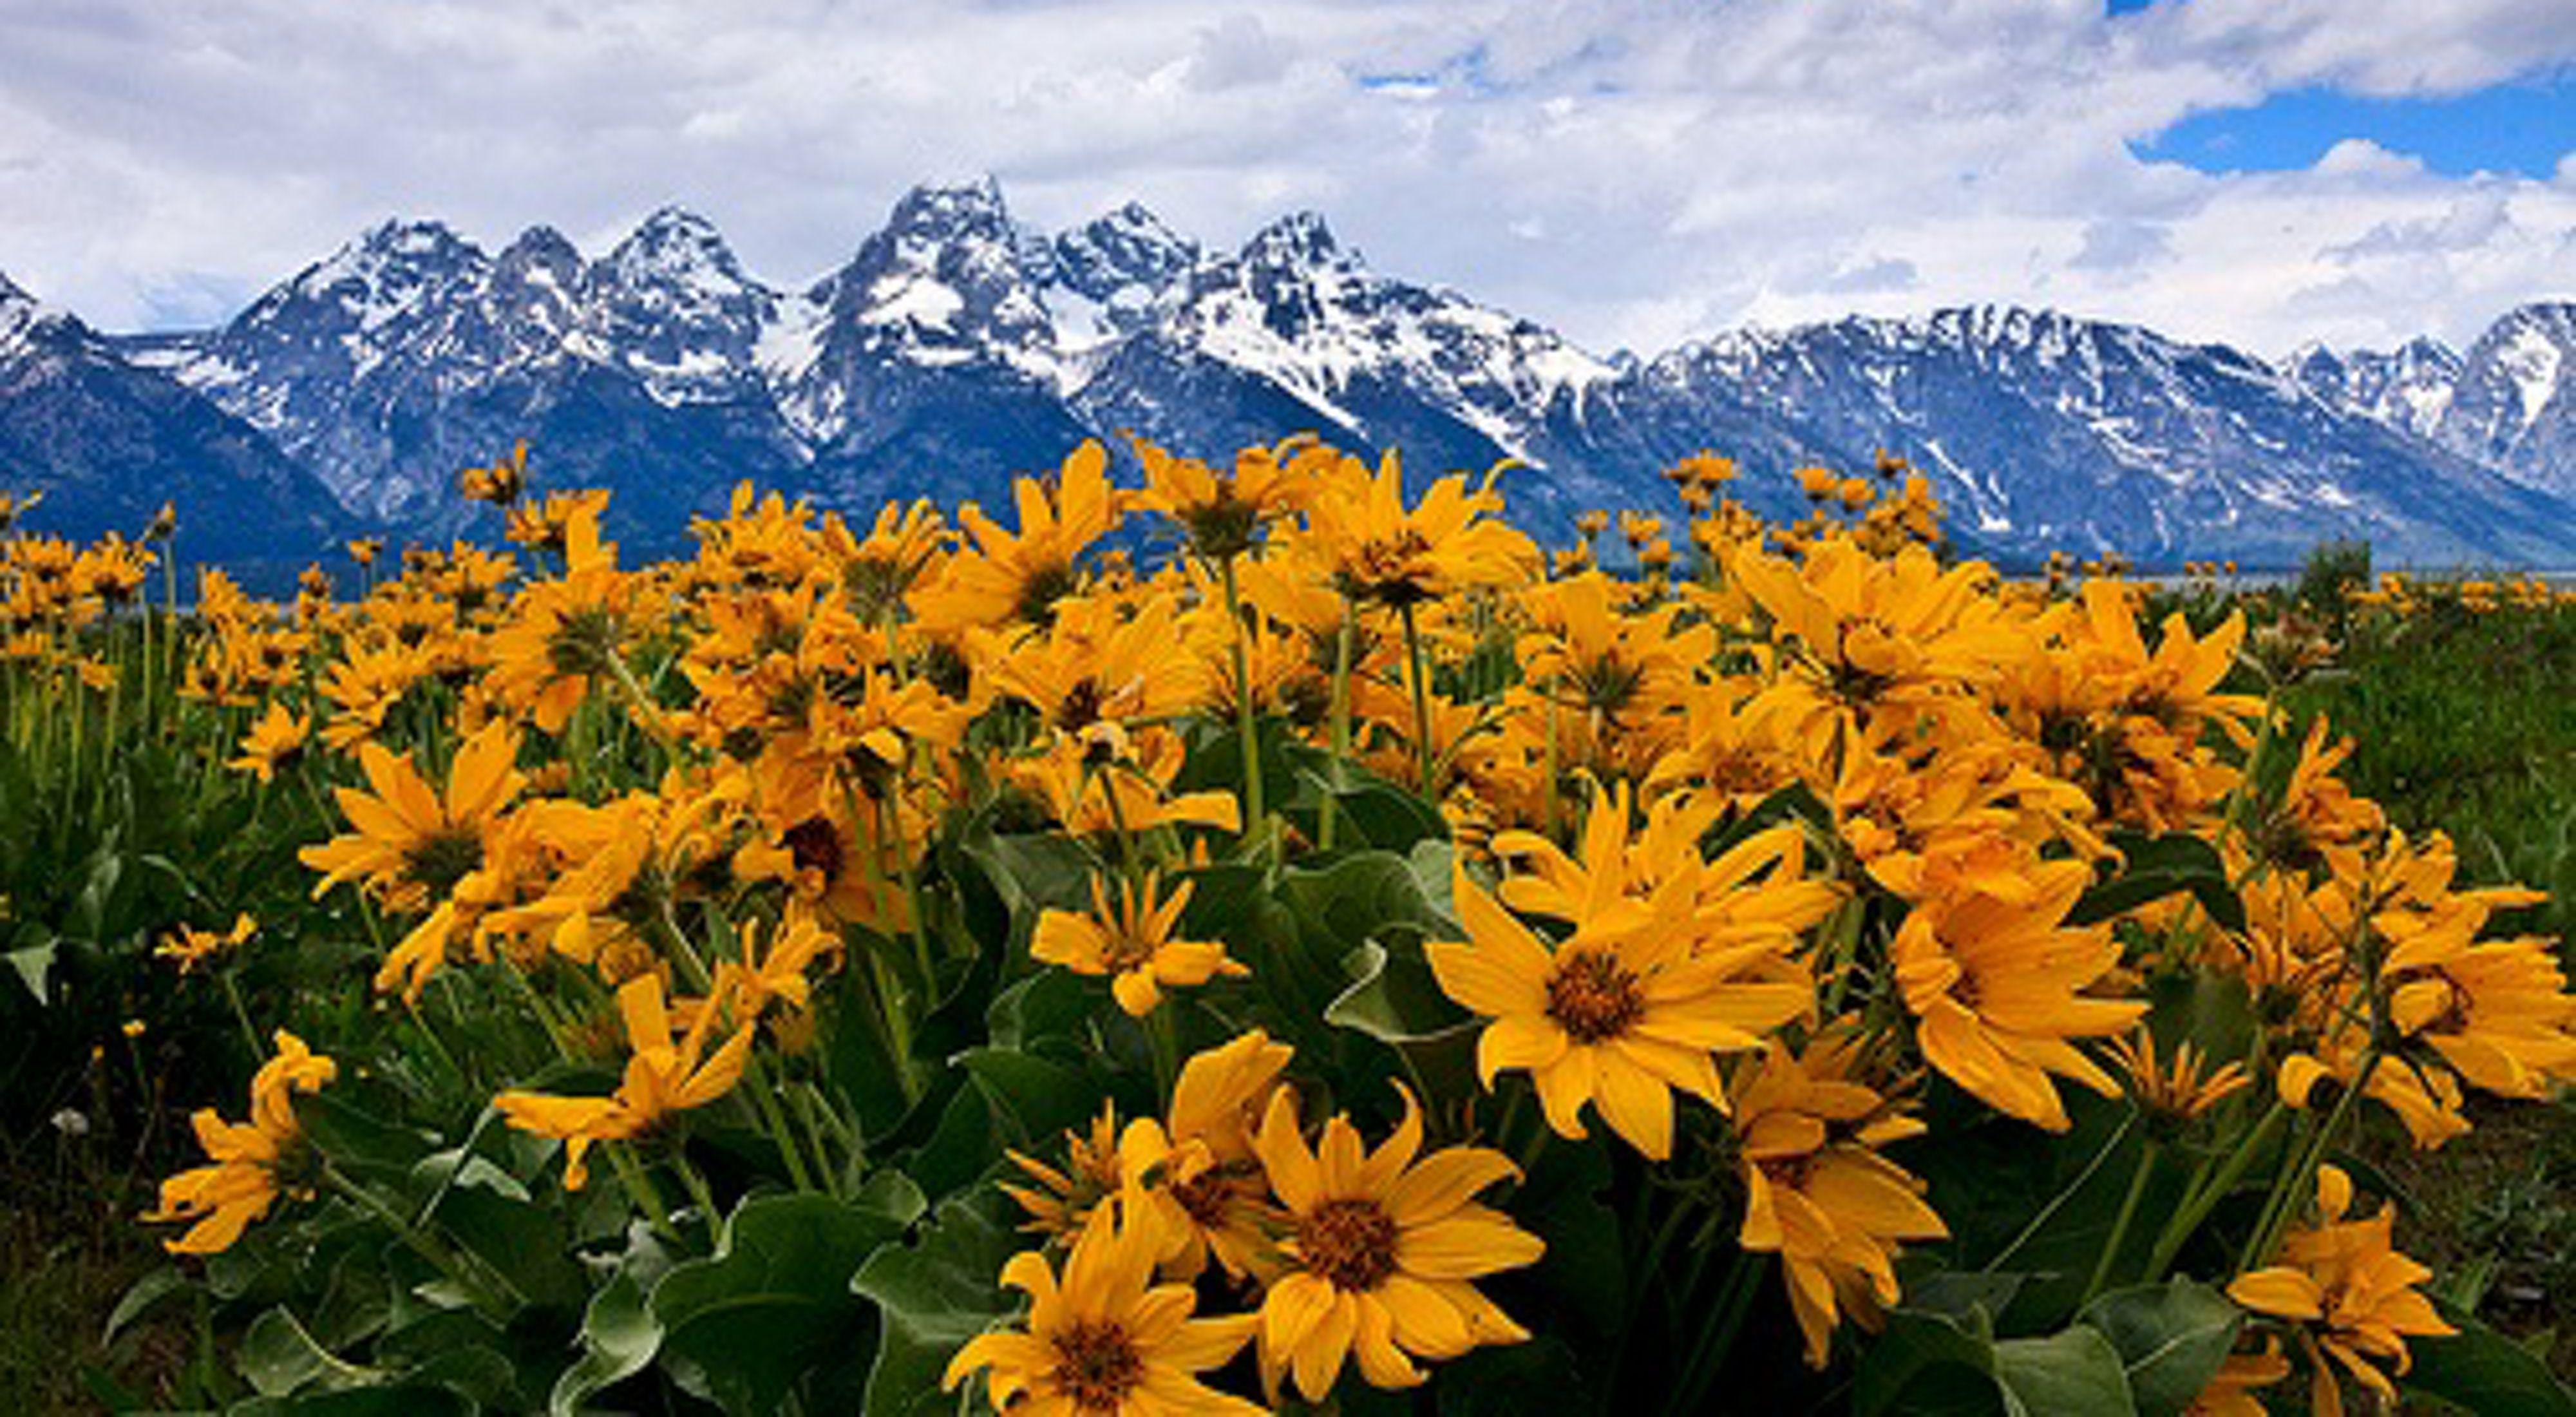 Yellow wildflowers in a field with the Grand Tetons in the background.